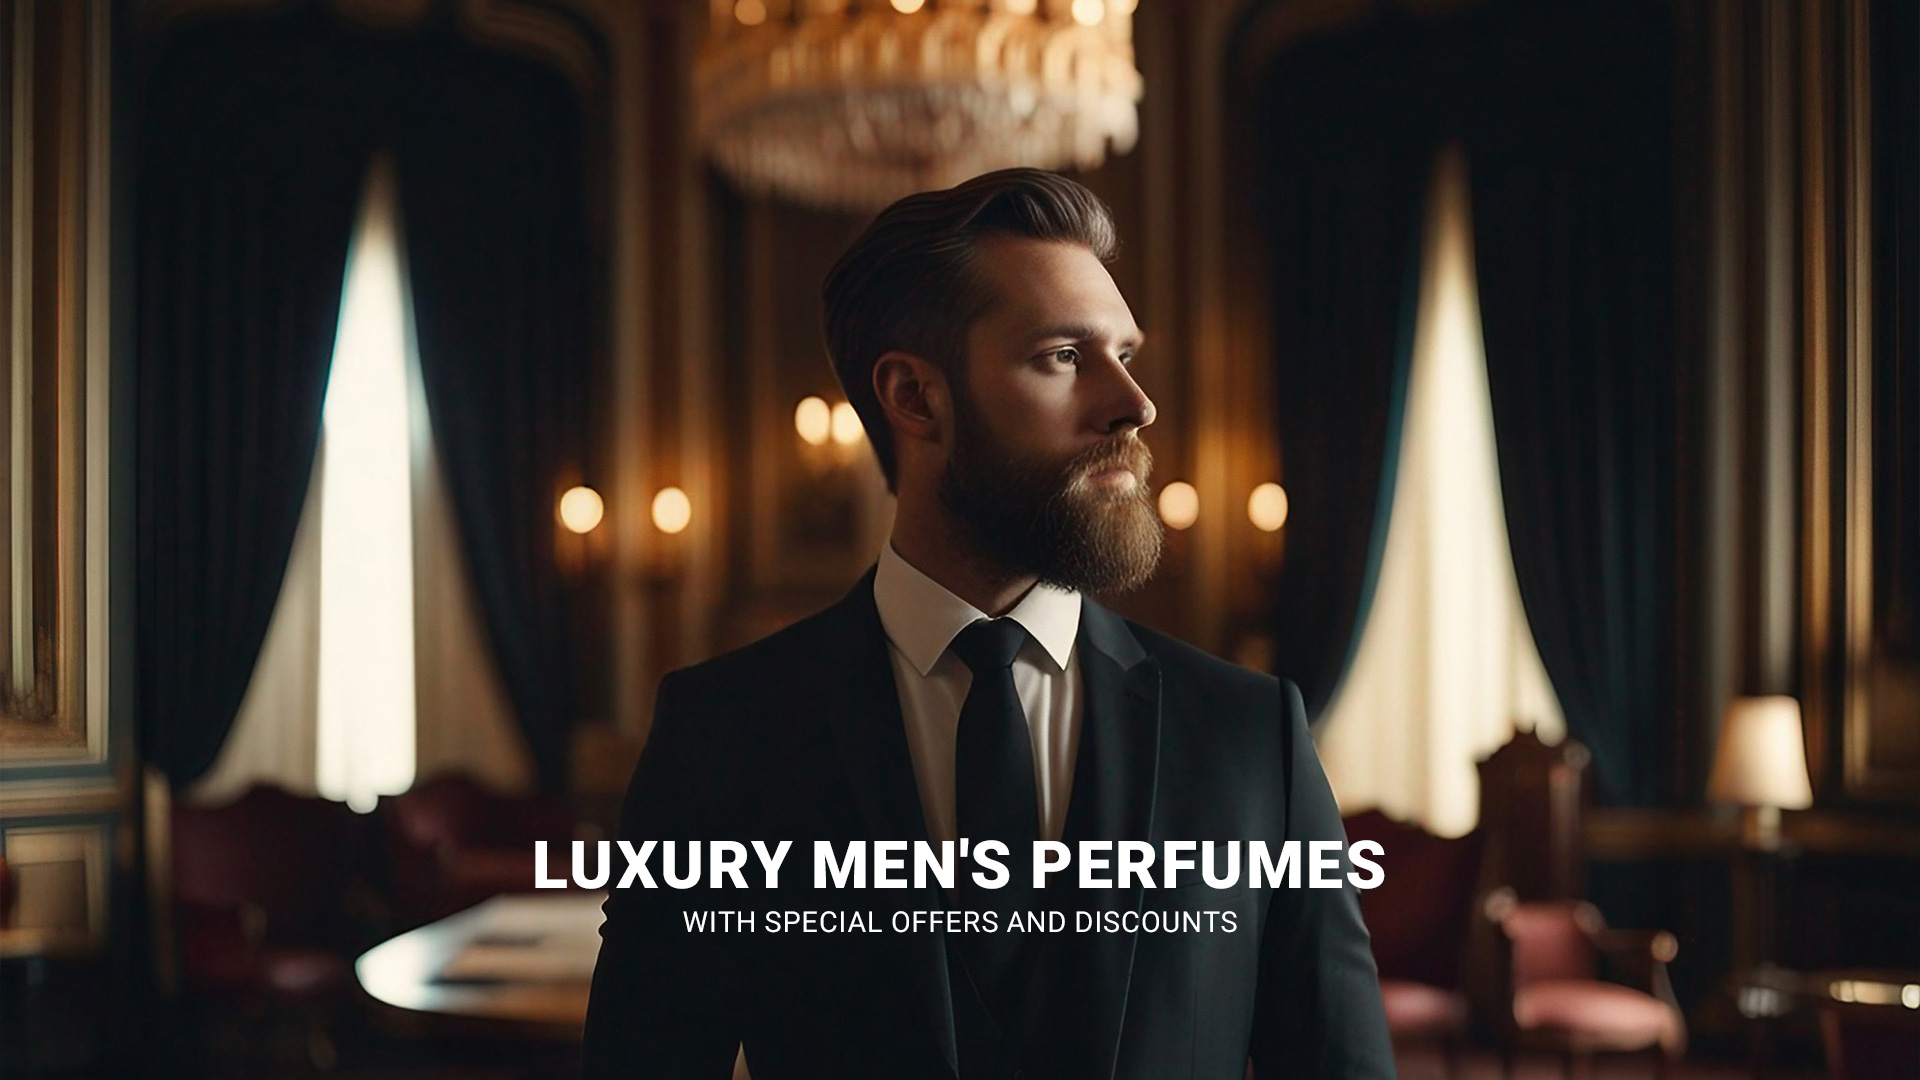 Scent-Sational Deals: Luxury Men's Perfumes with Special Offers and Discounts